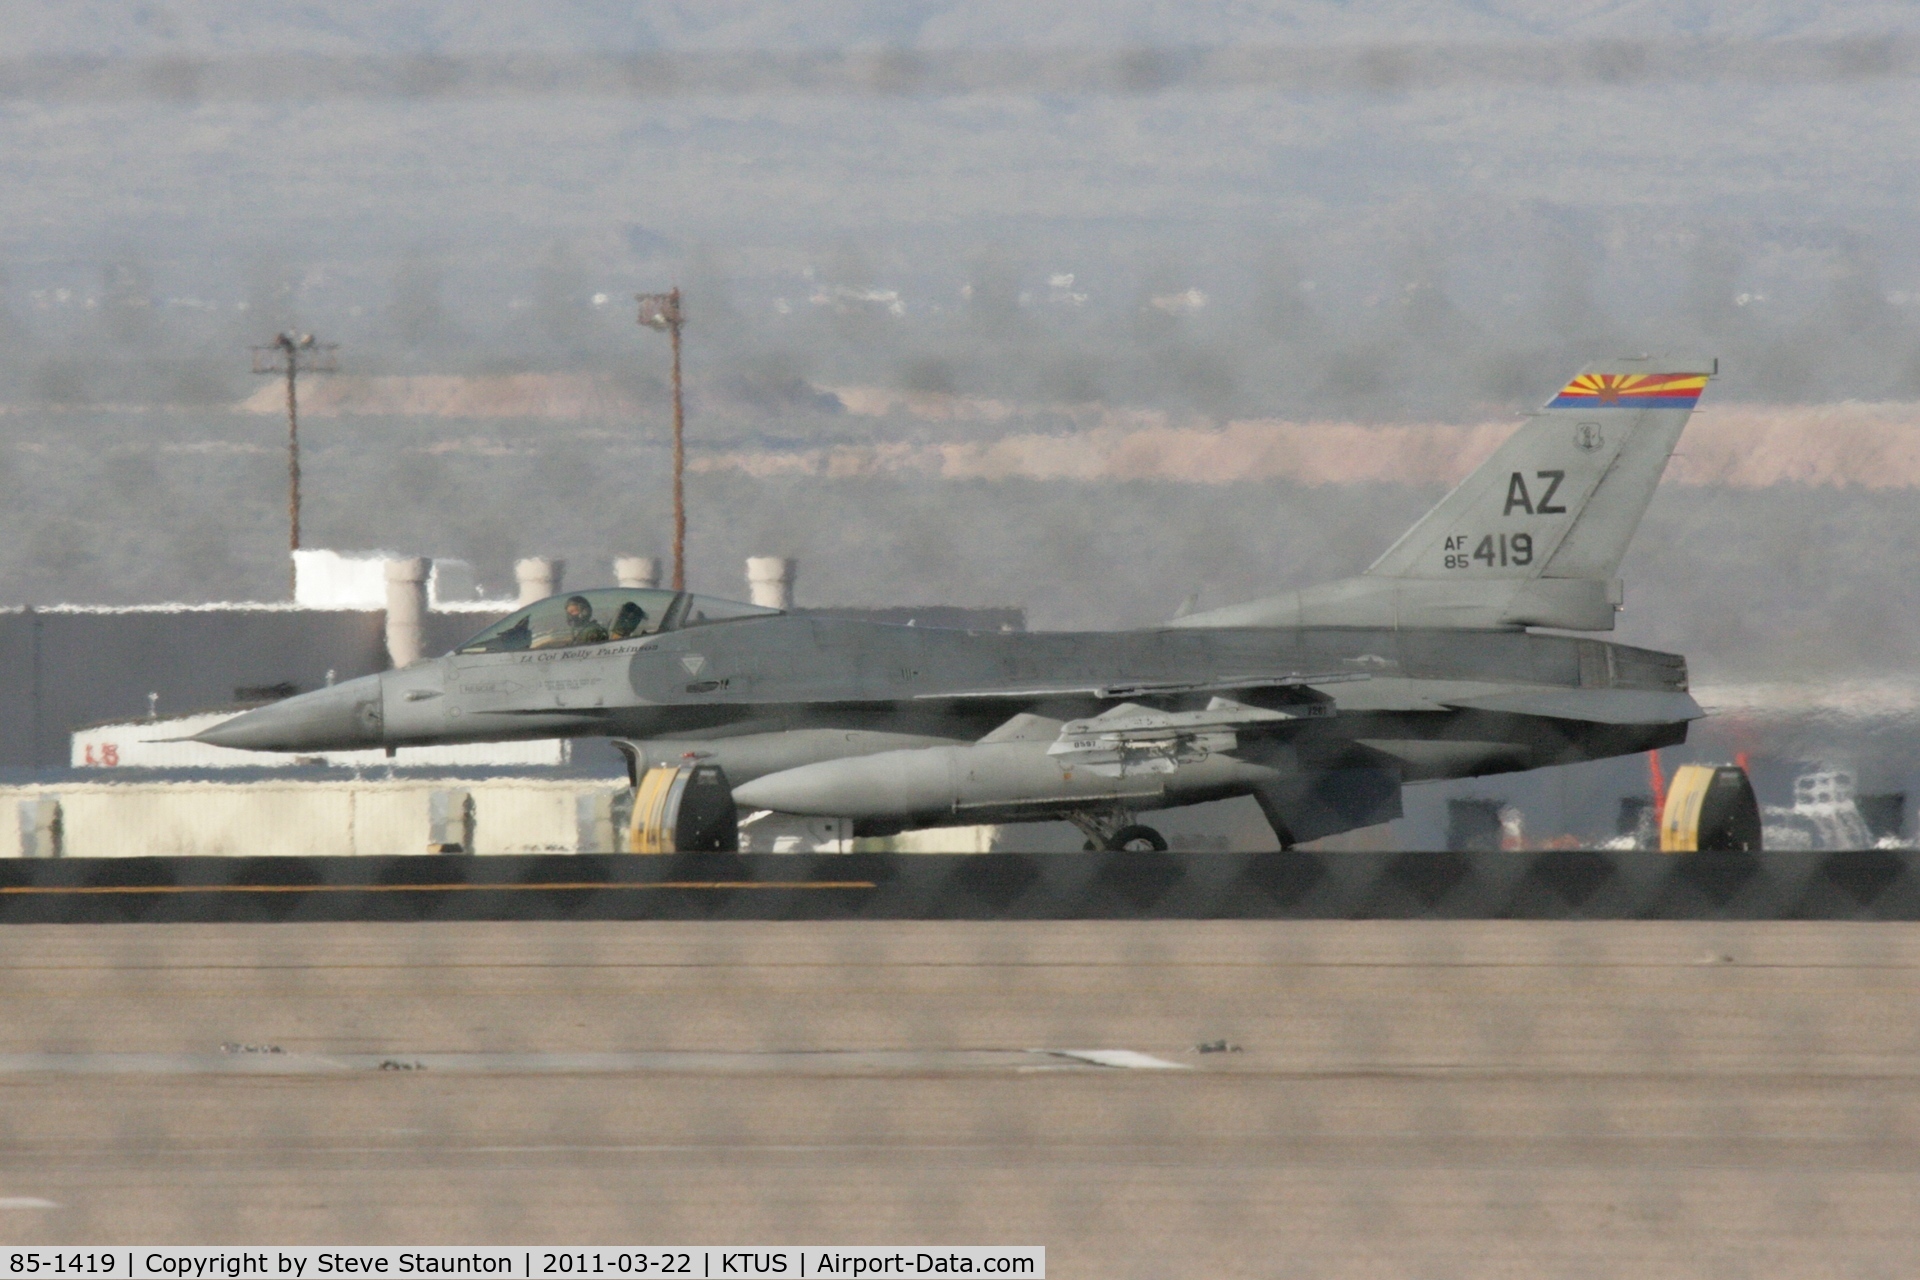 85-1419, 1985 General Dynamics F-16C C/N 5C-199, Taken at Tucson International Airport, in March 2011 whilst on an Aeroprint Aviation tour